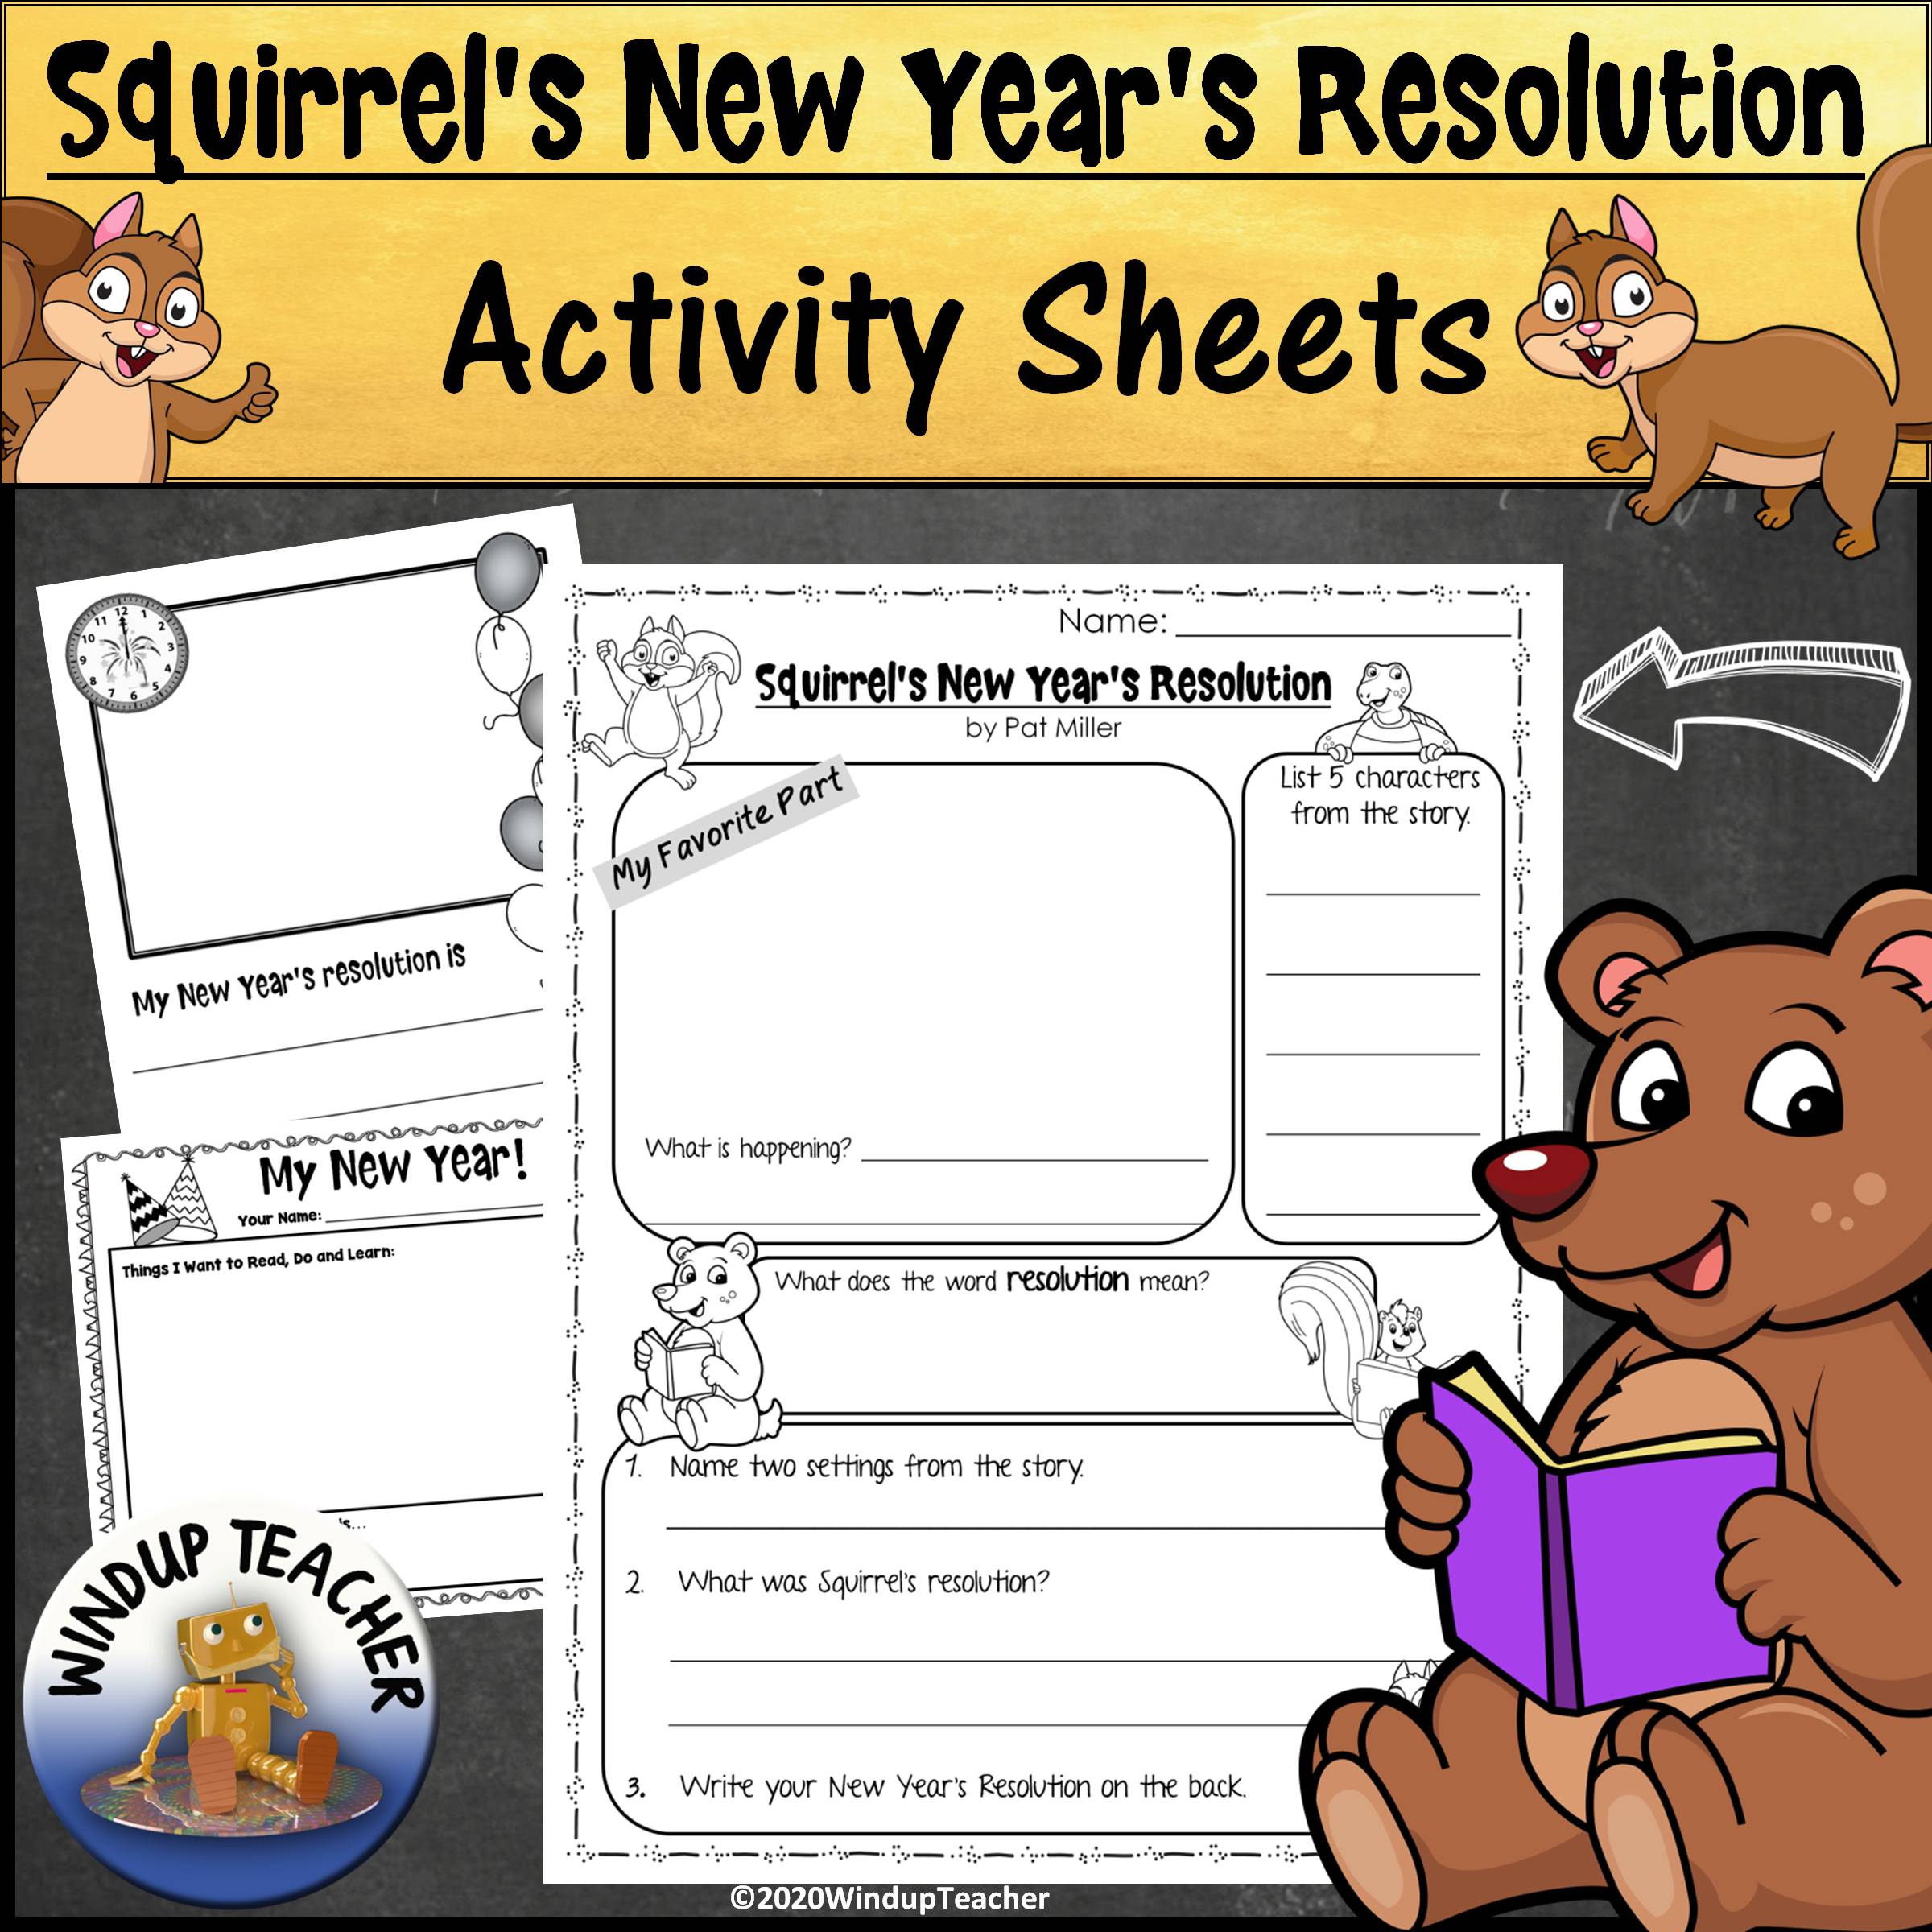 Squirrels new years resolution activity sheets made by teachers